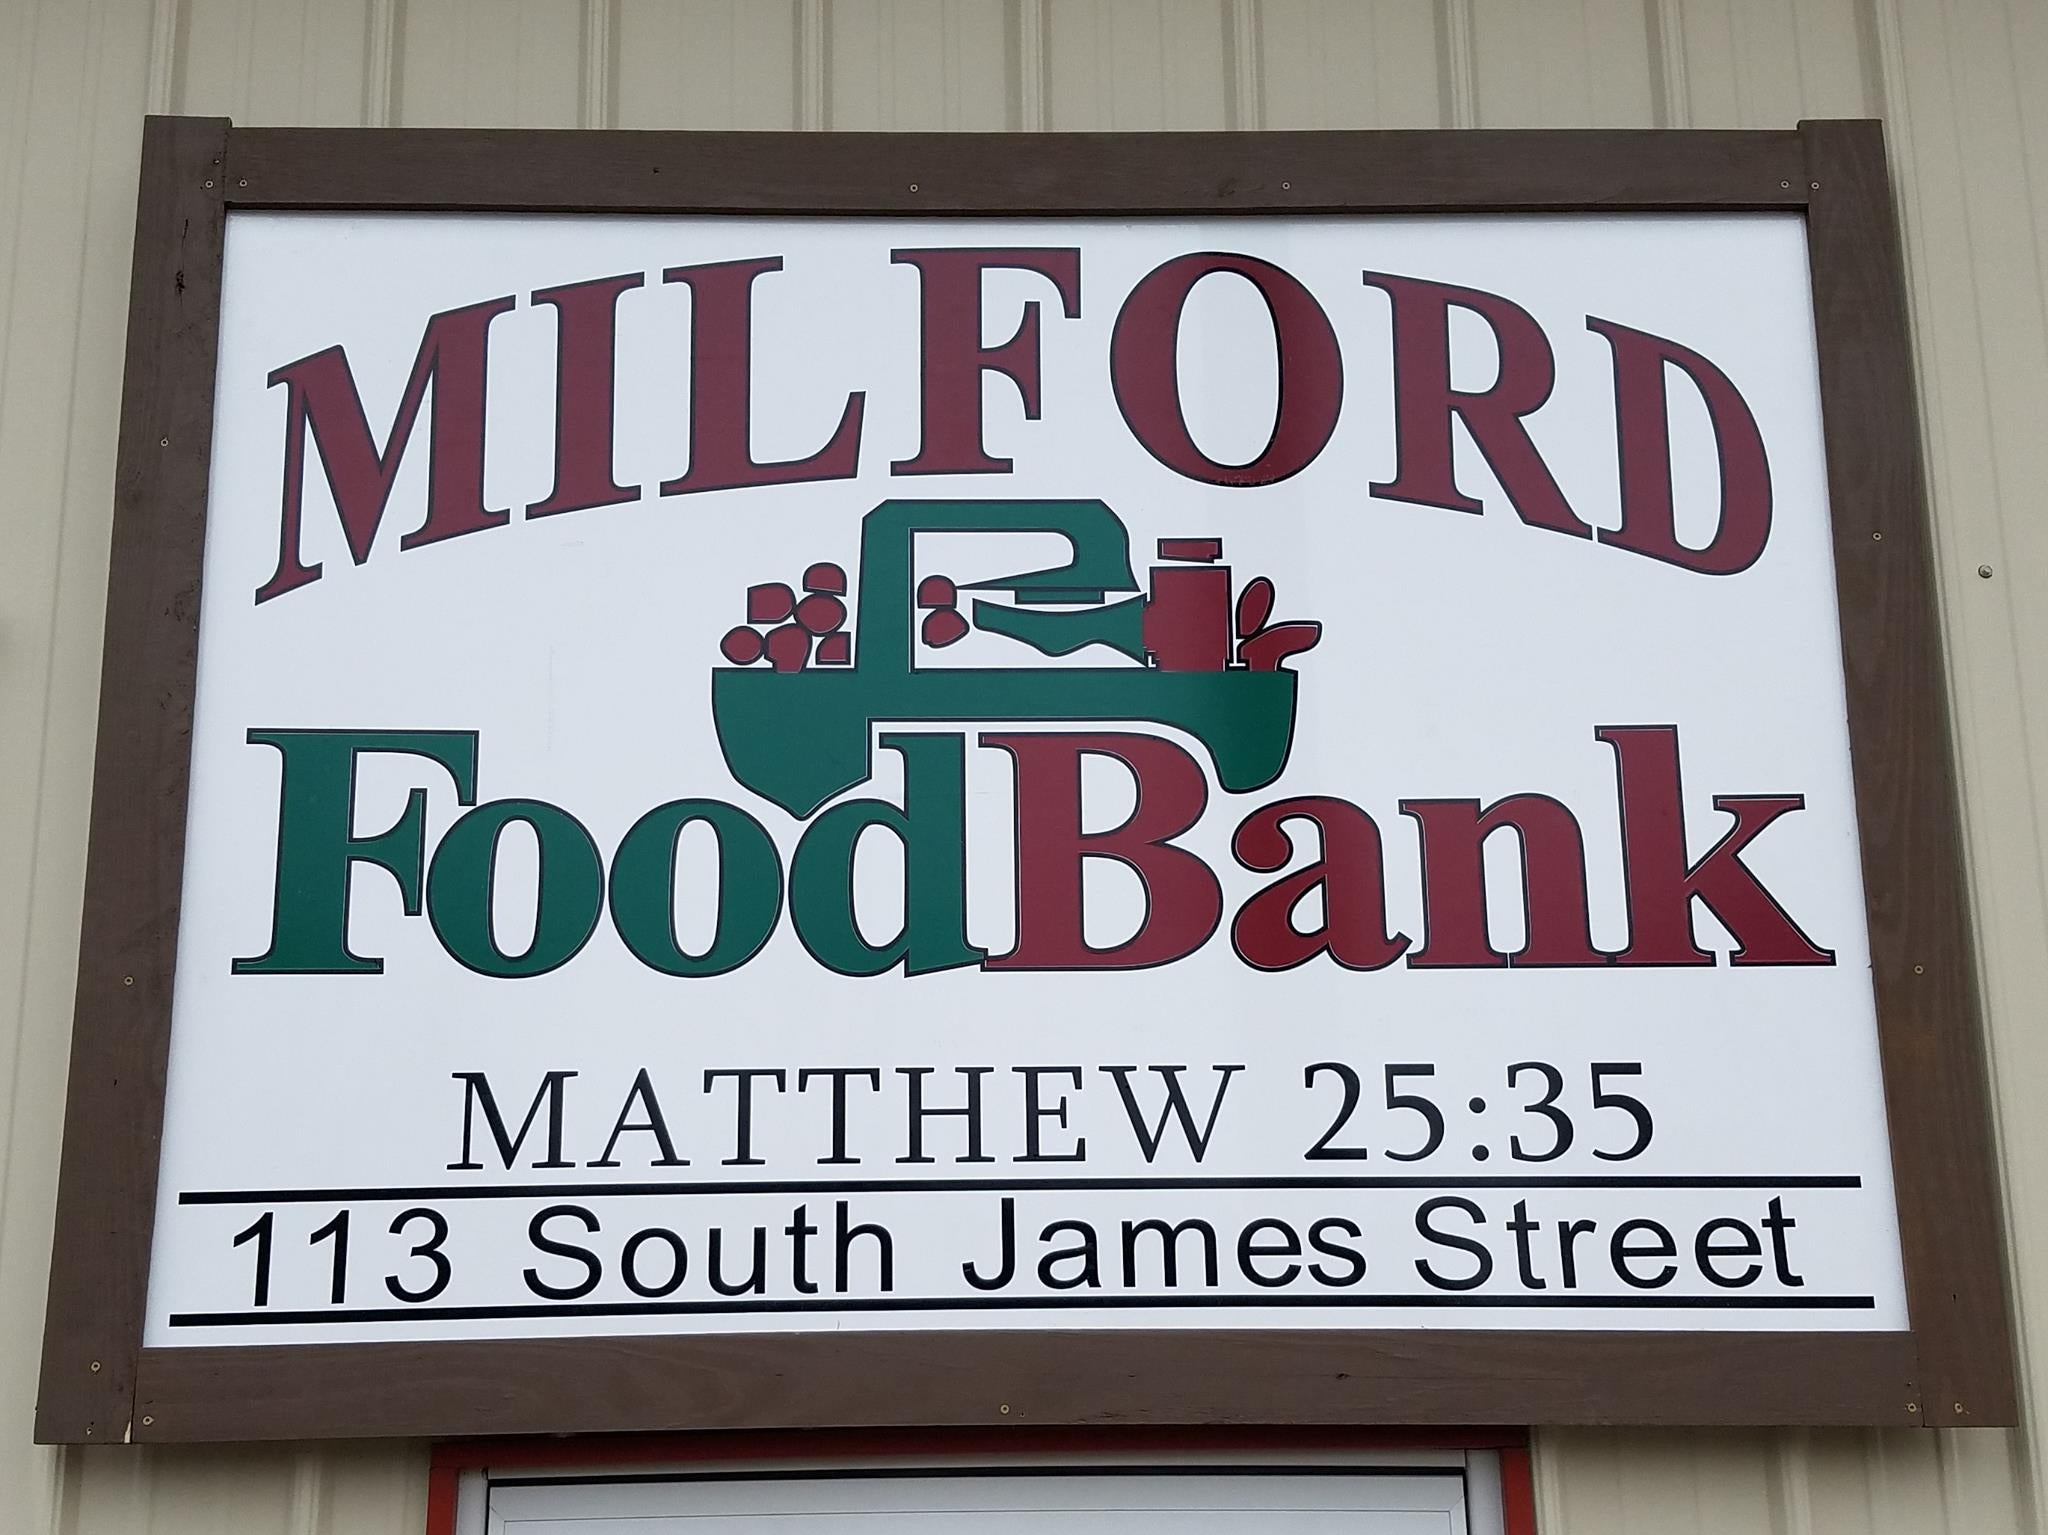 The Milford Food Bank Sign